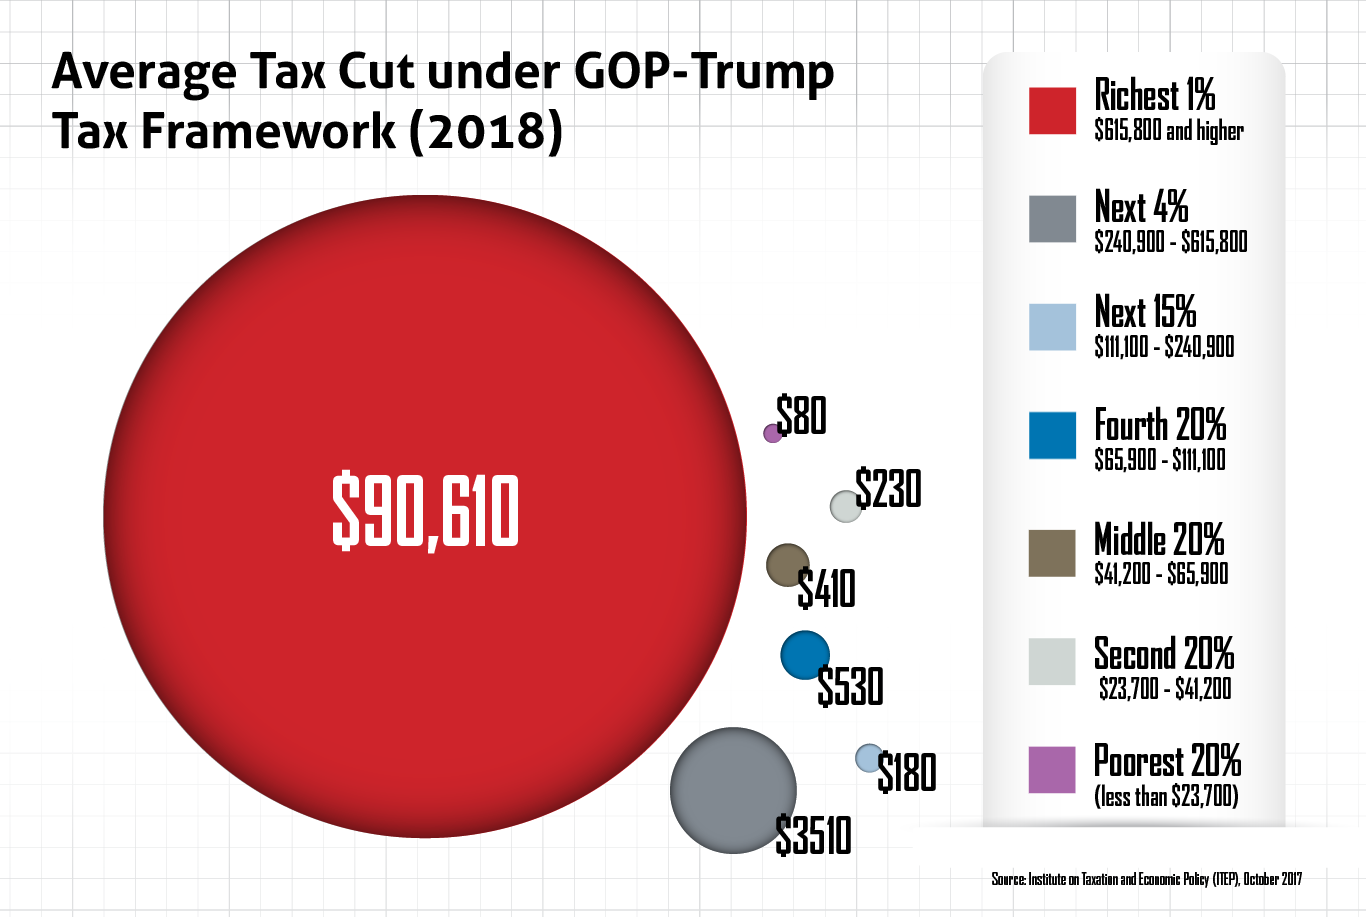 Middle-Income More Likely Than the Rich to Pay More Under Trump-GOP Tax Plan